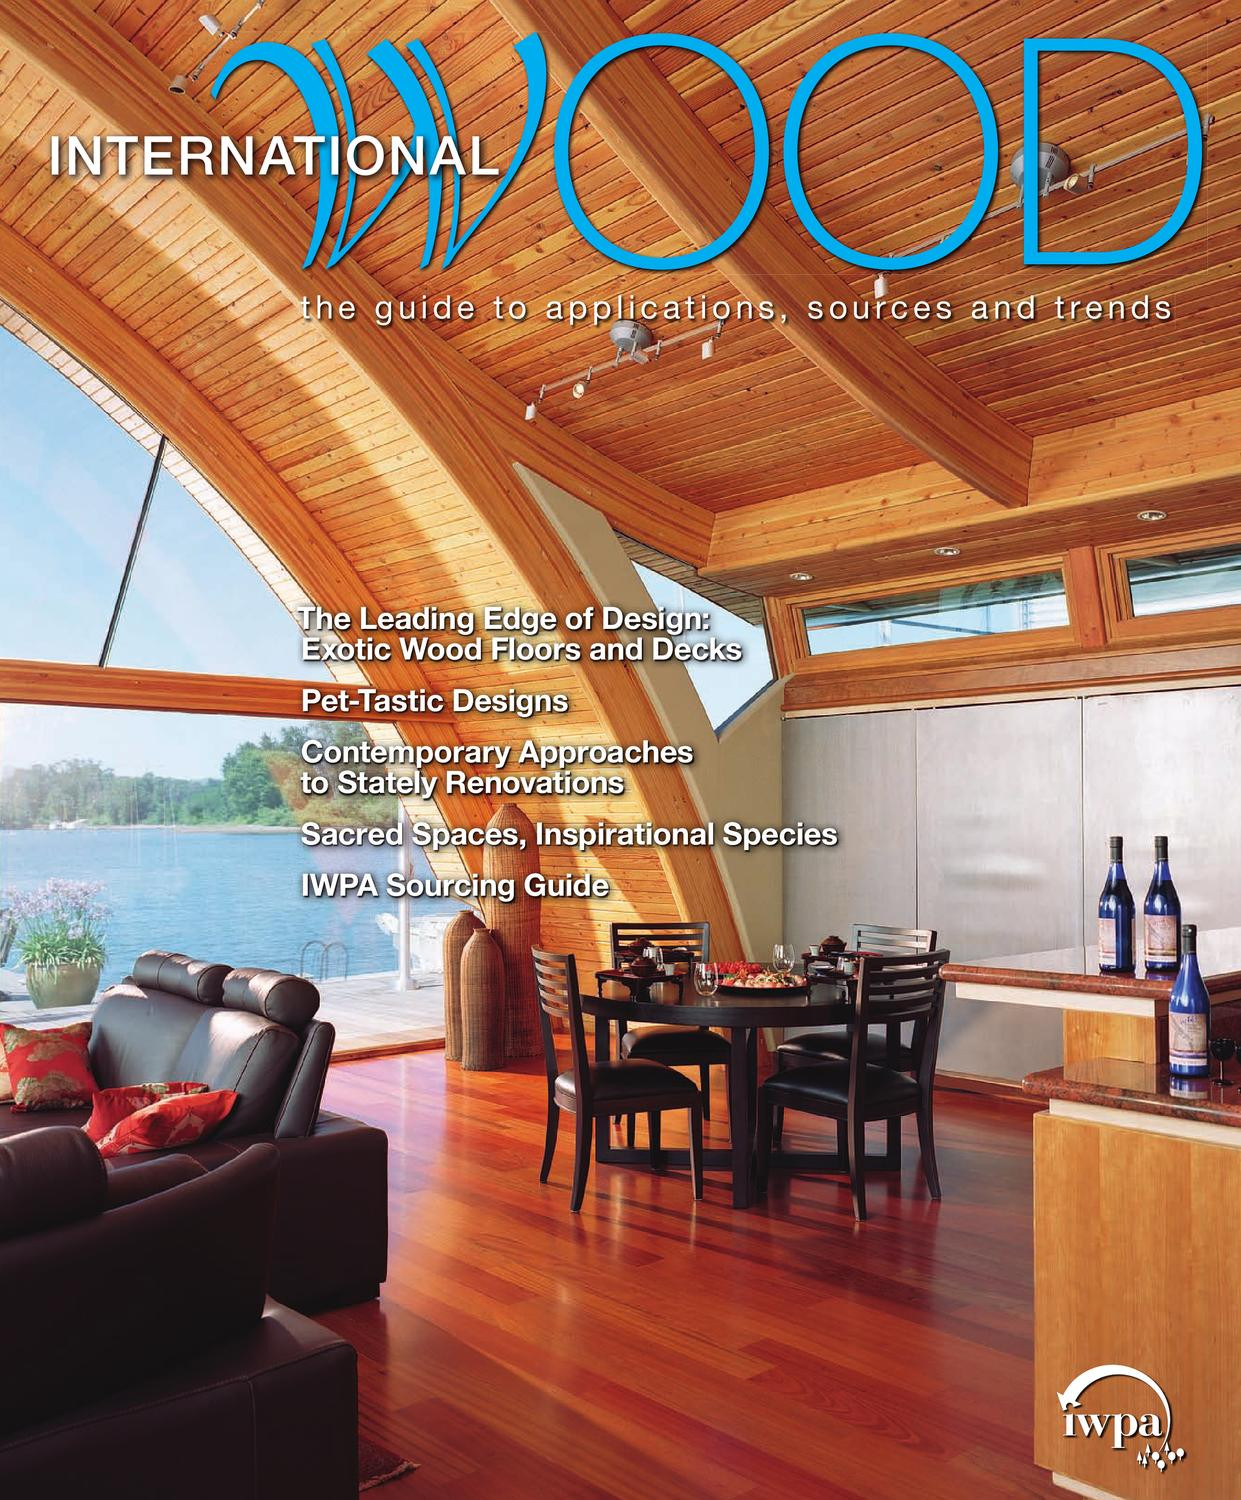 25 Lovable How to Fix Cupping Hardwood Floors 2024 free download how to fix cupping hardwood floors of international wood magazine 09 by bedford falls communications issuu regarding page 1